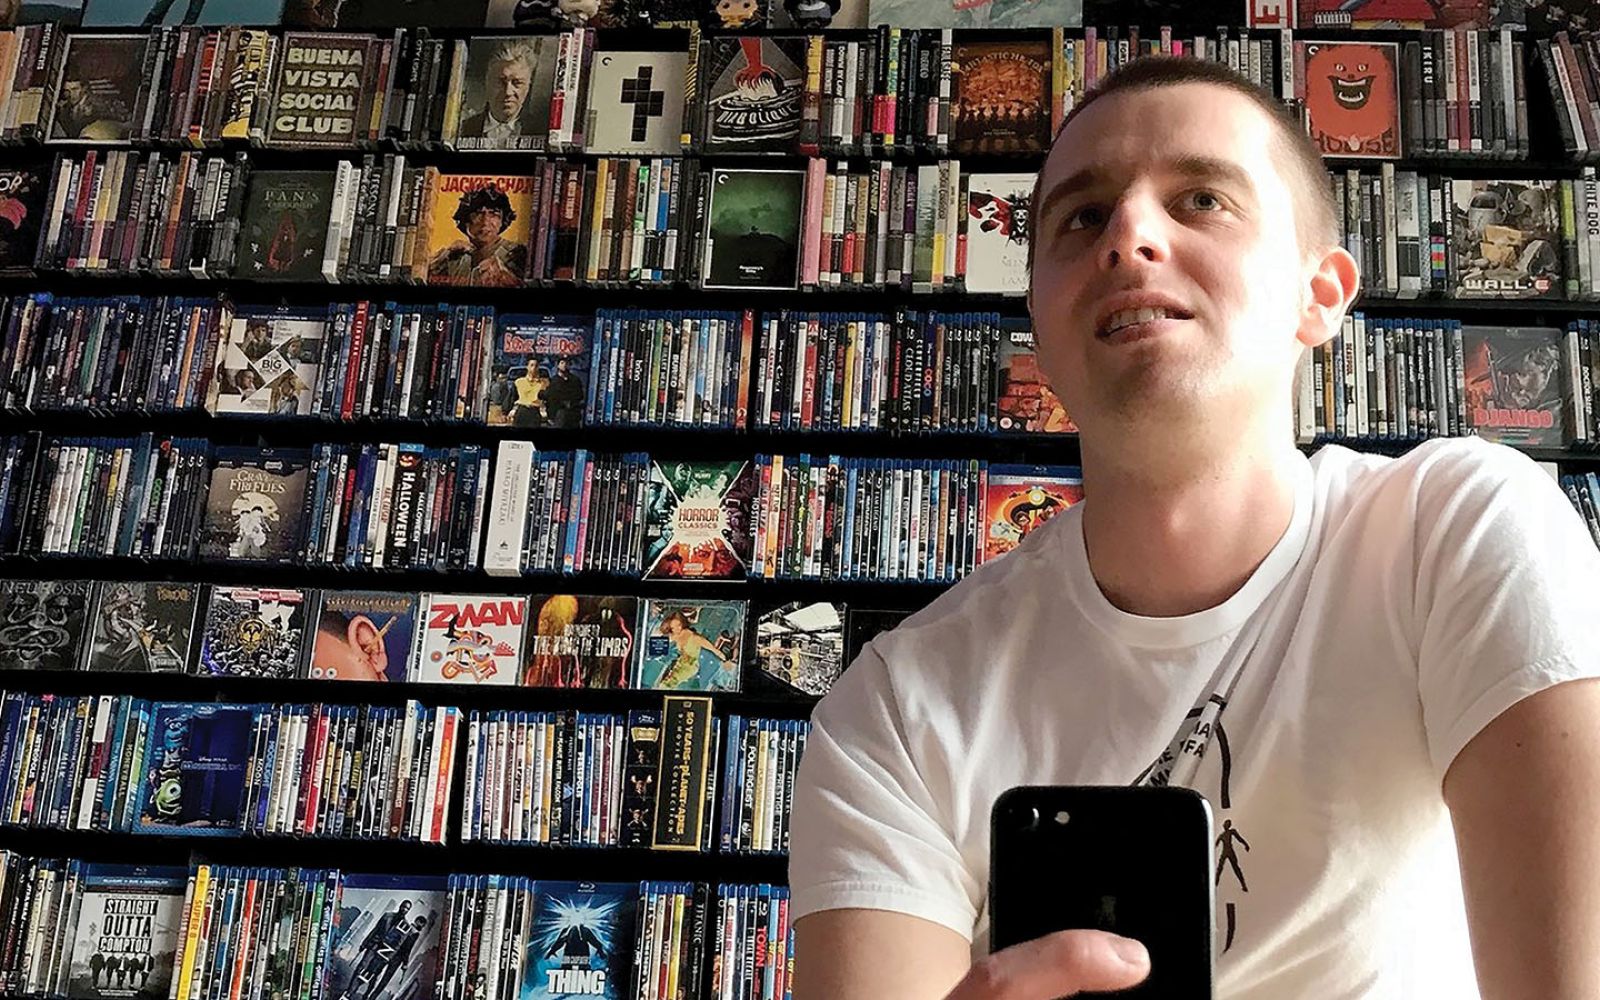 Cinephile Collin McCallister sports an impressive collection of about 1,500 albums and 1,500 movies.